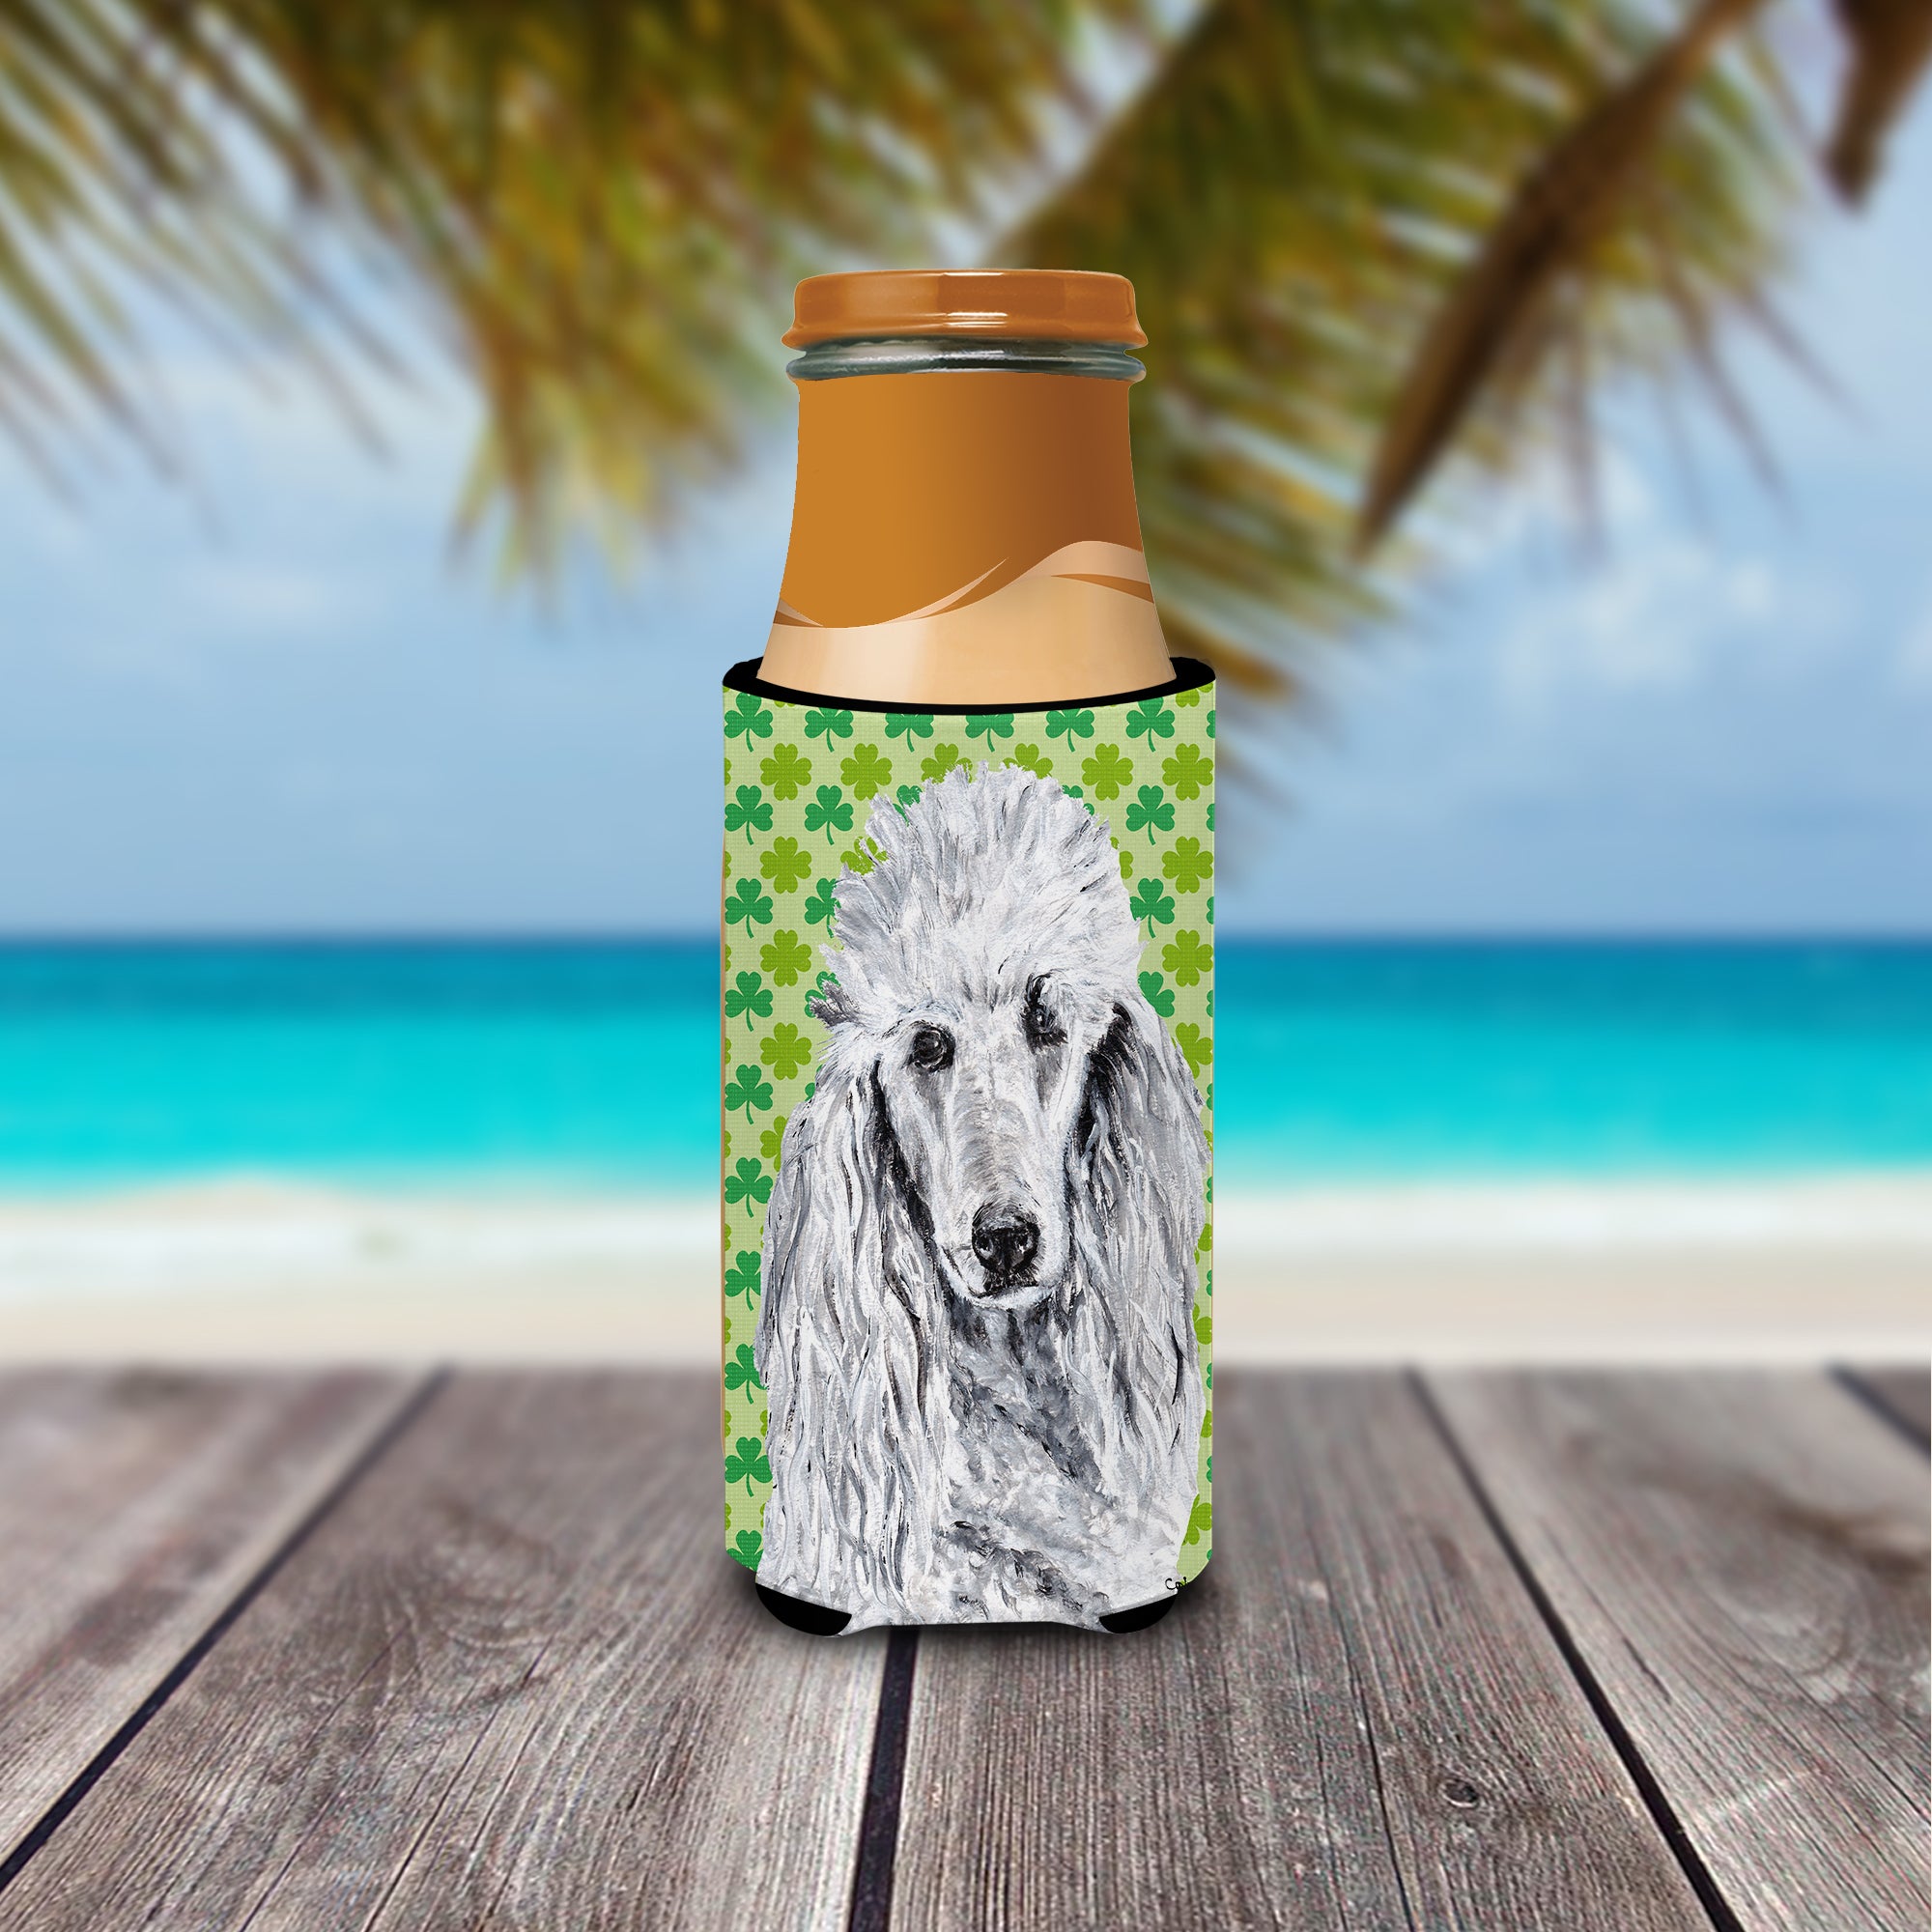 White Standard Poodle Lucky Shamrock St. Patrick's Day Ultra Beverage Insulators for slim cans SC9727MUK.